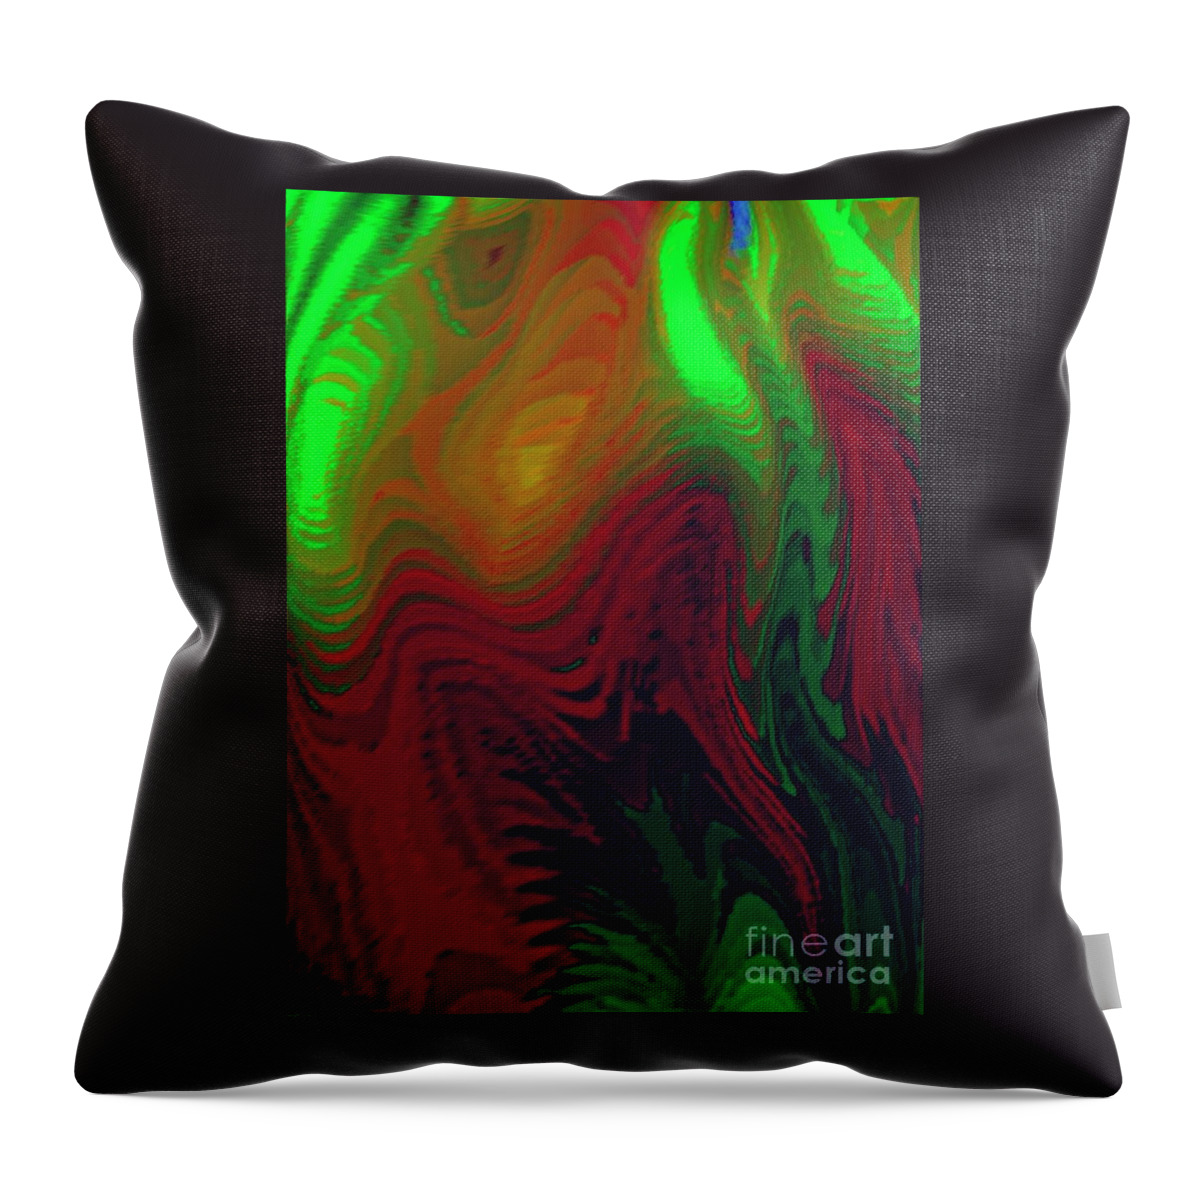 Primitive Glow Whimsical Throw Pillow featuring the digital art Primitive Escape by Glenn Hernandez